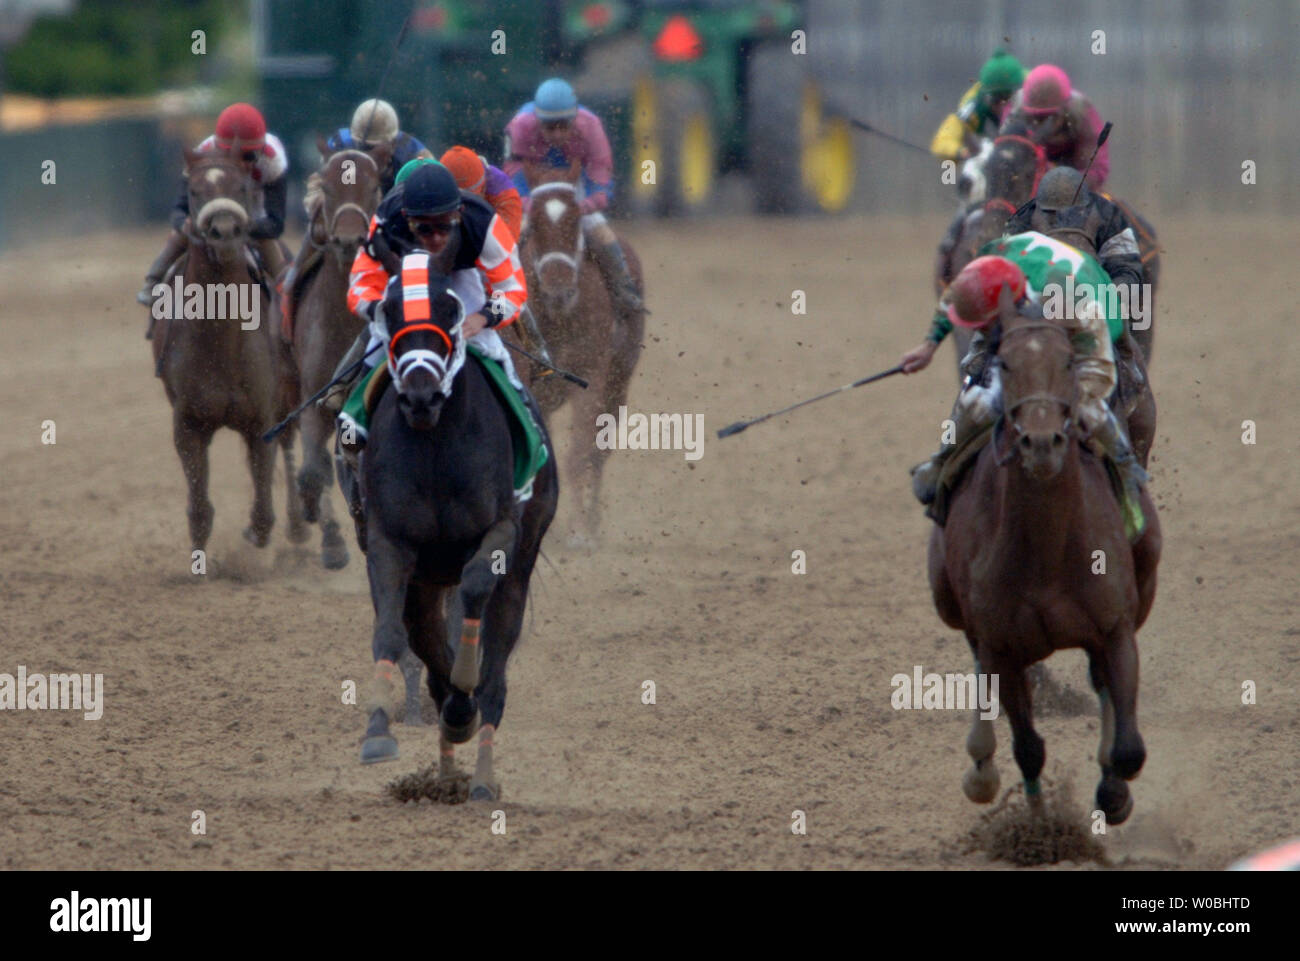 Jockey Jeremy Rose aboard Alex Afleet (R)  looks back on Scrappy T in the 130th running of the Preakness Stakes on May 21, 2005 at the Pimlico Race Course in Baltimore, MD. Afleet Alex won the race after nearly falling in the homestretch.  (UPI Photo/Mark Goldman) Stock Photo